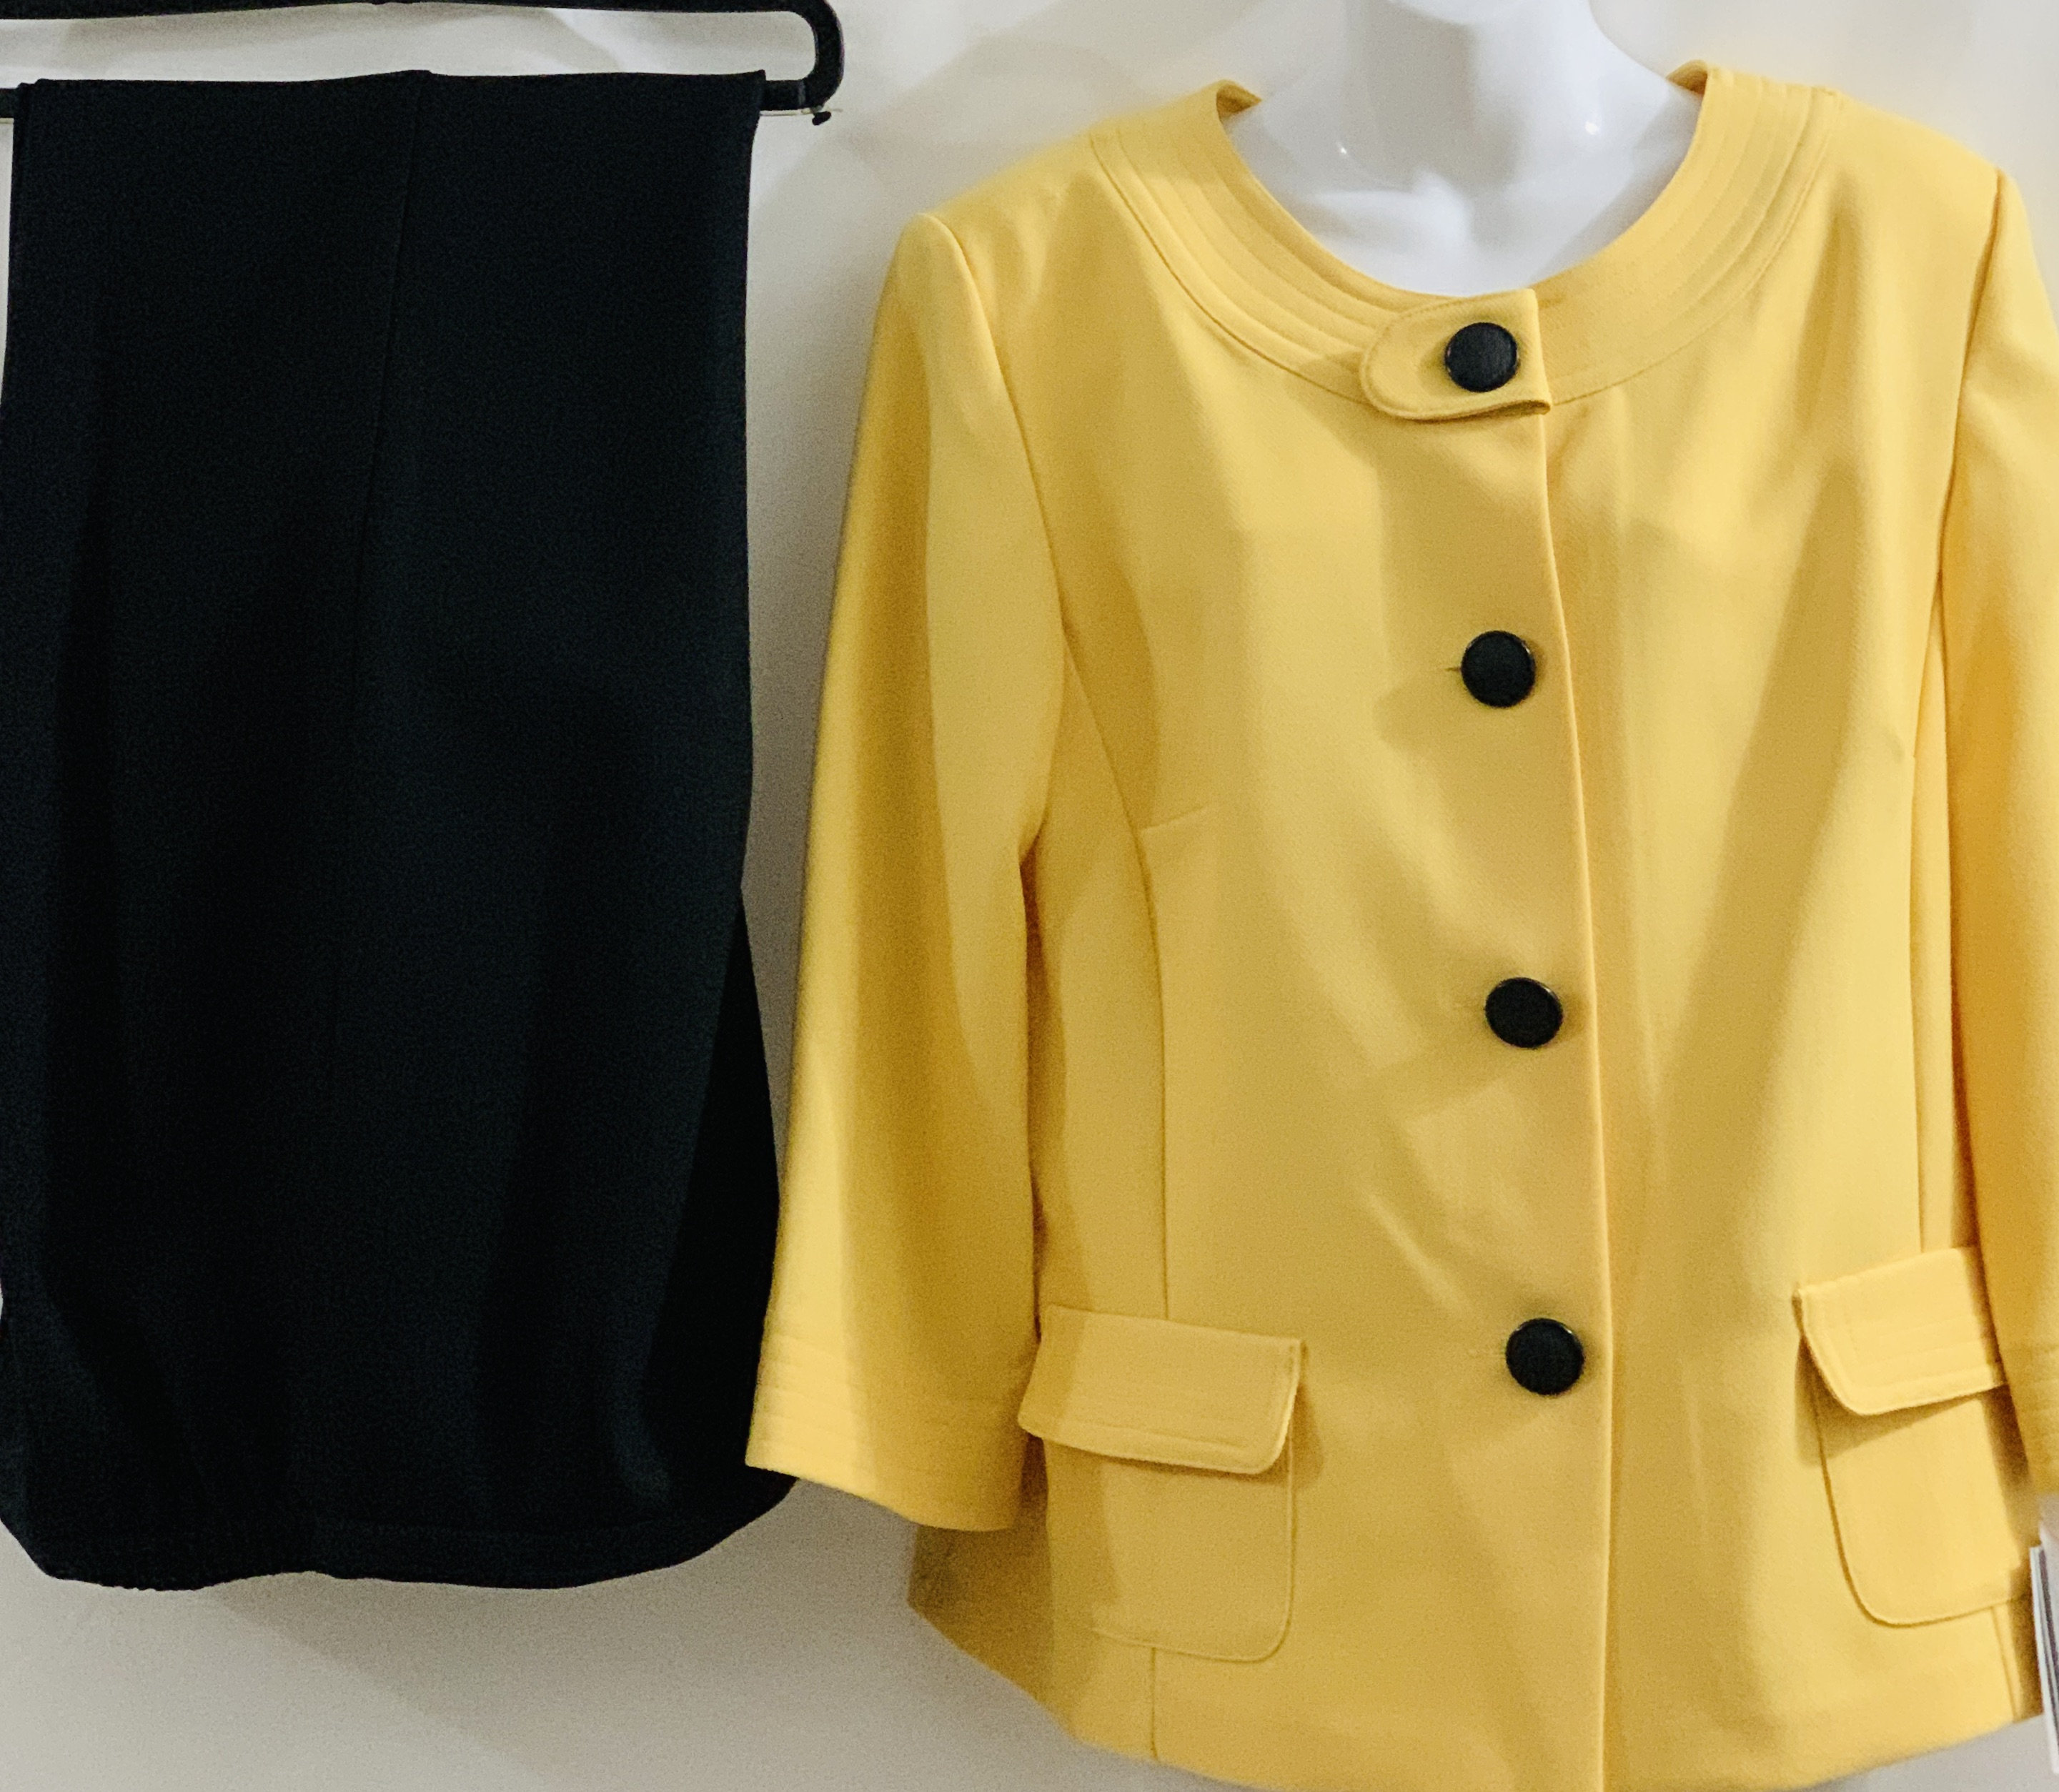 Size 16 Pants Suit, Ladies Pants and Blazer, New With Tags. Party